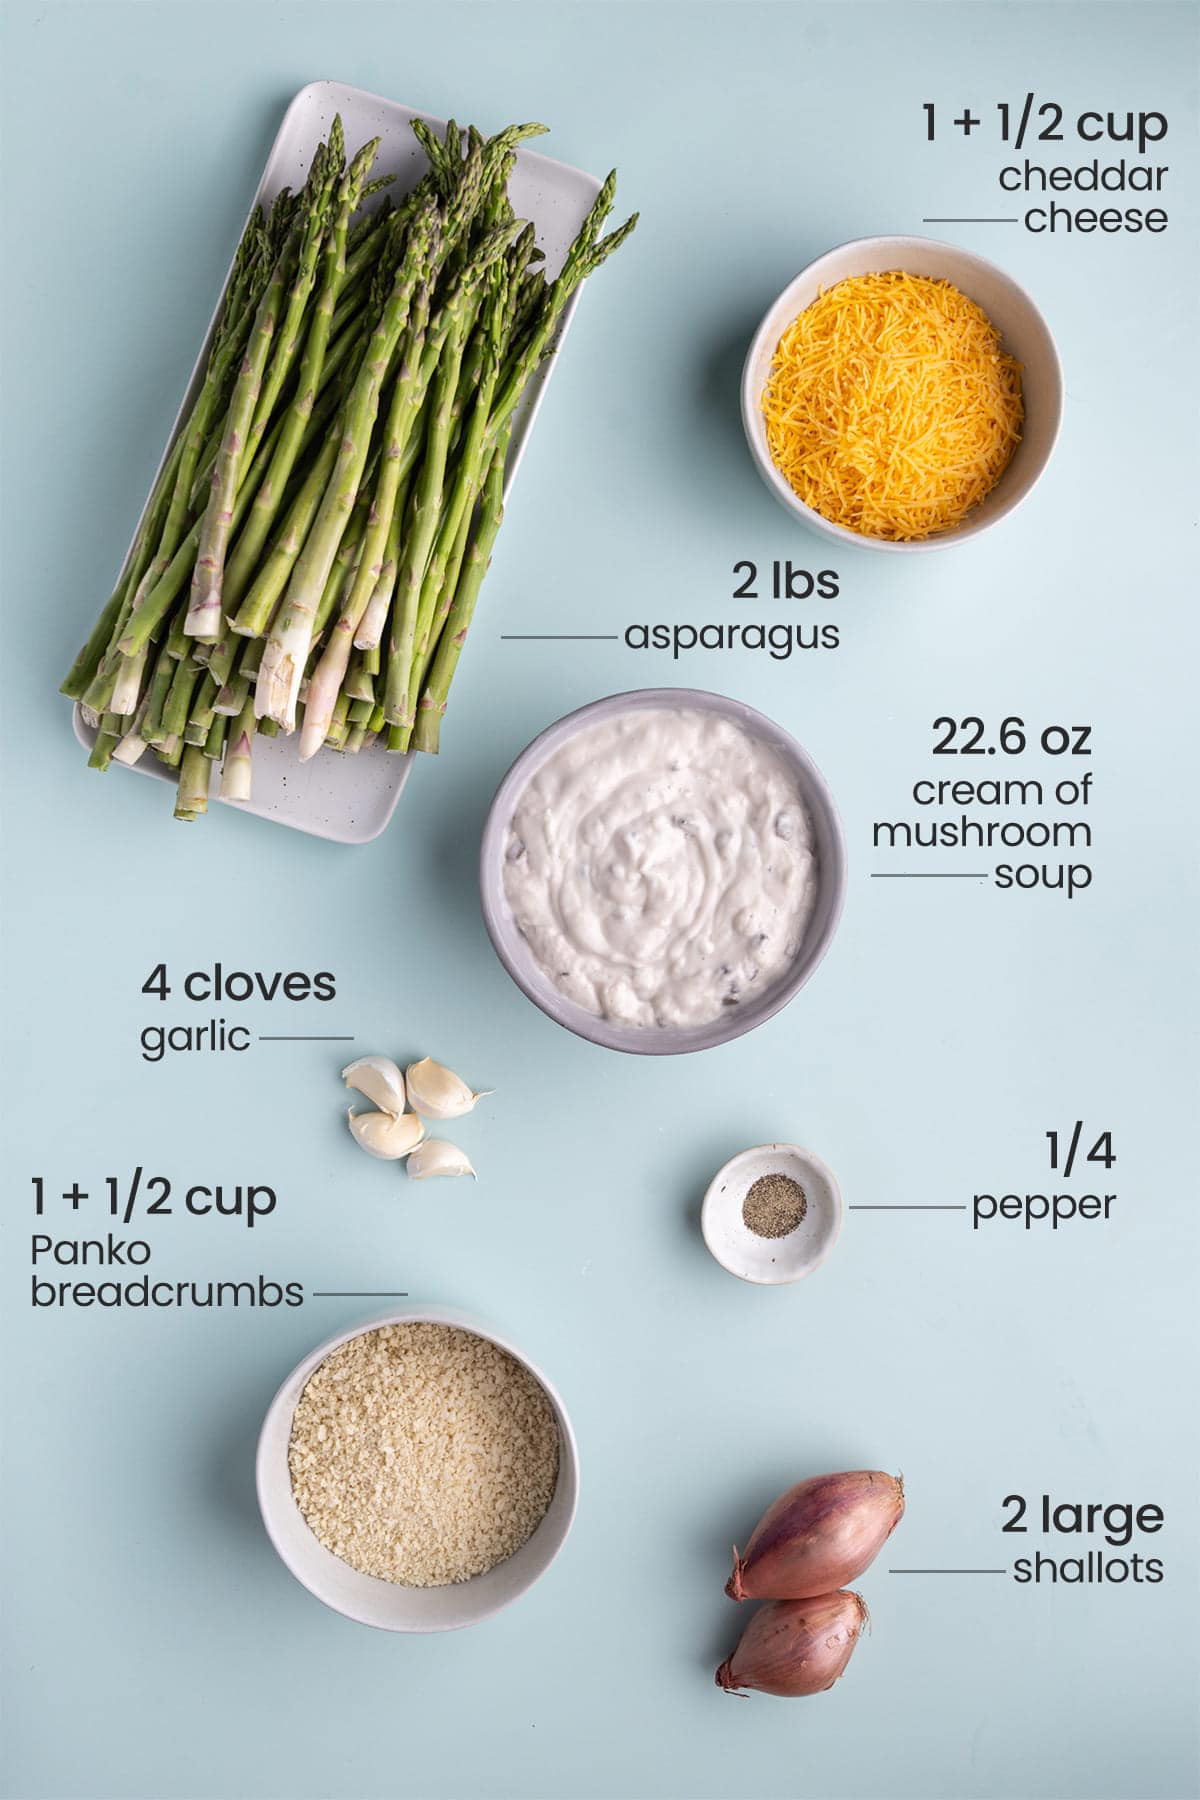 All ingredients needed for Asparagus Casserole including asparagus, cheddar cheese, cream of mushroom soup, garlic, pepper, Panko, and shallot